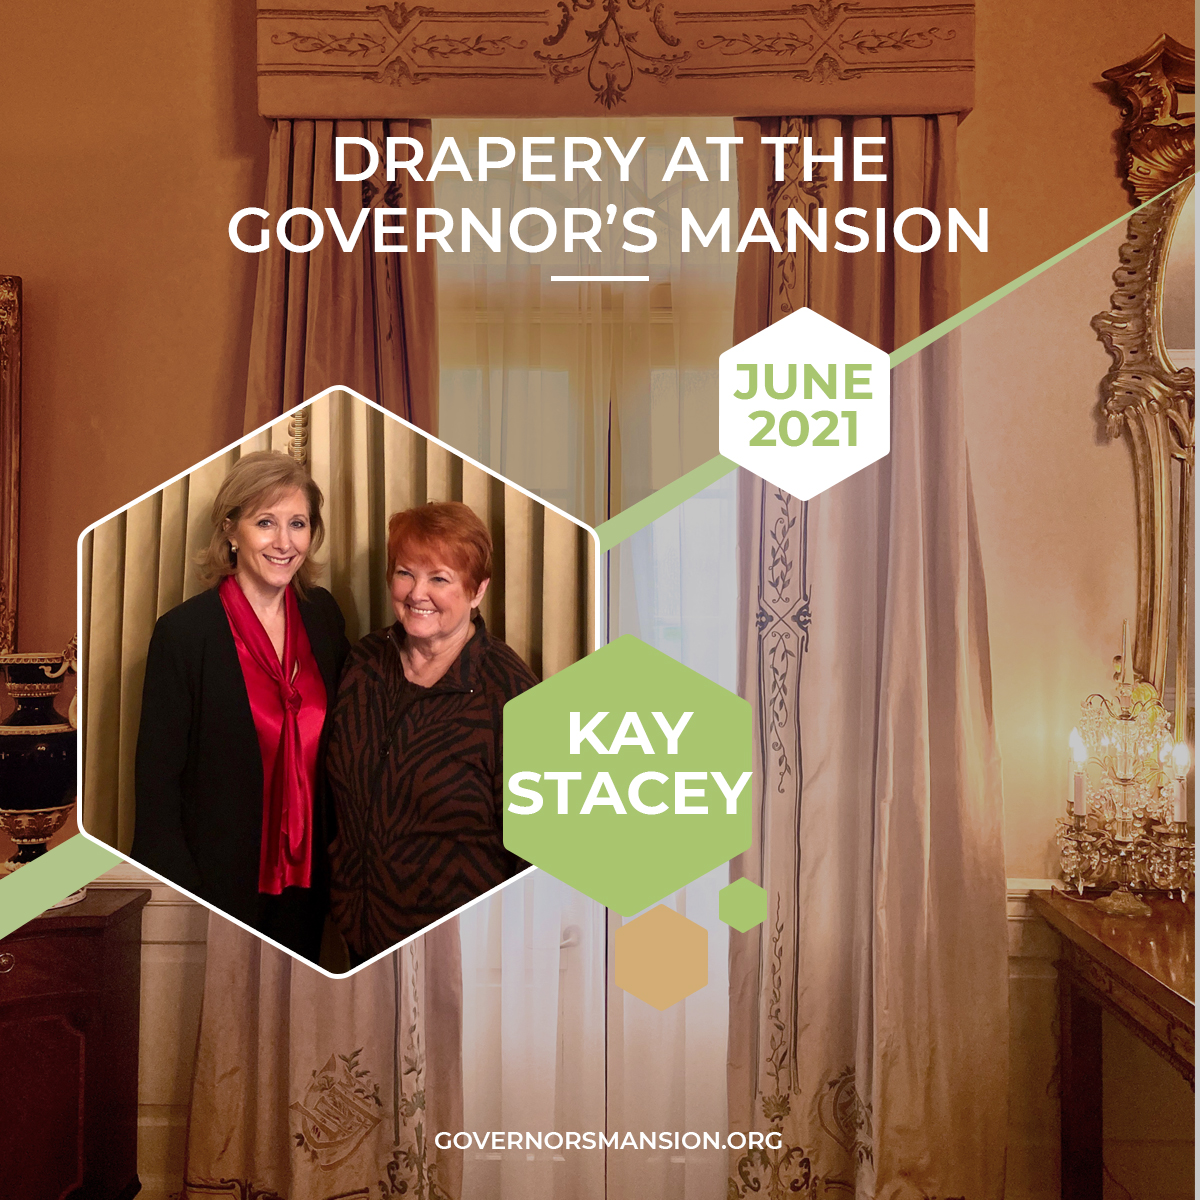 The Governor’s Mansion: Drapery at the Governor’s Mansion